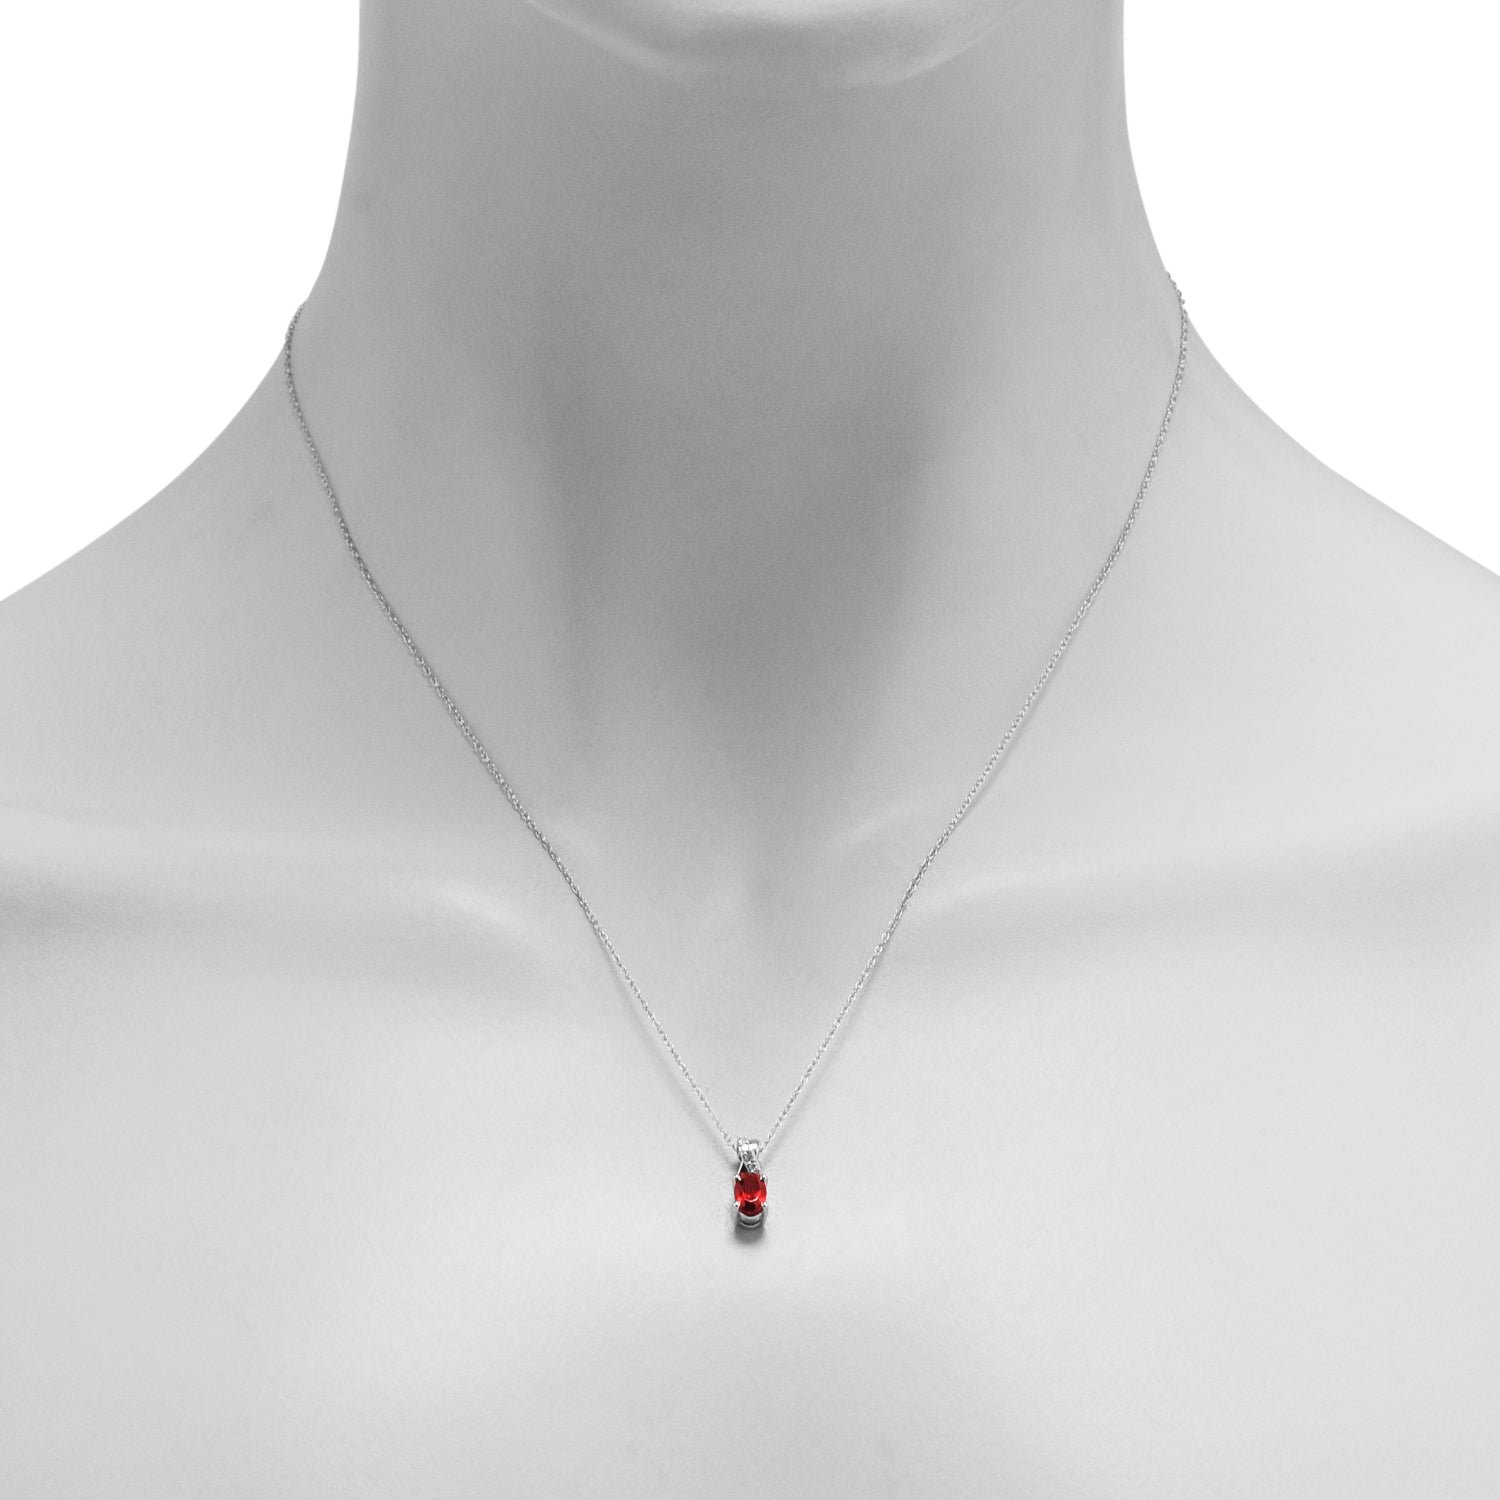 Oval Garnet Necklace in 10kt White Gold with Diamonds (1/20ct tw)